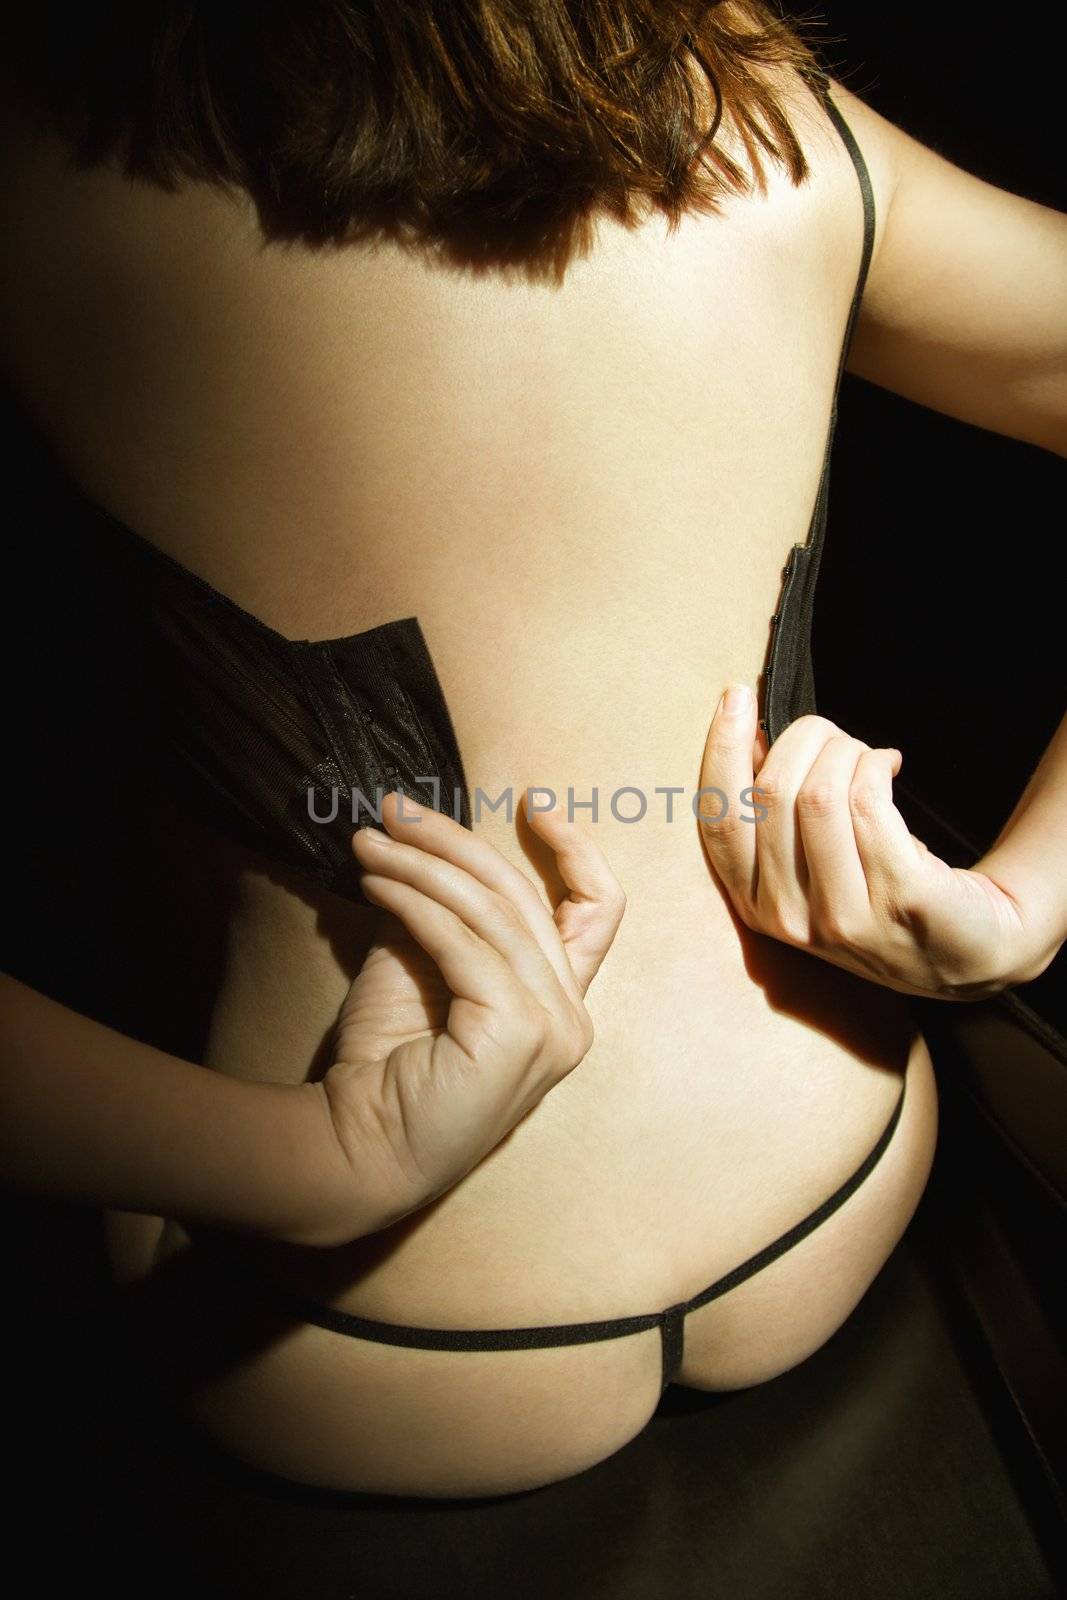 Back view of attractive Caucasian woman in lingerie undressing.